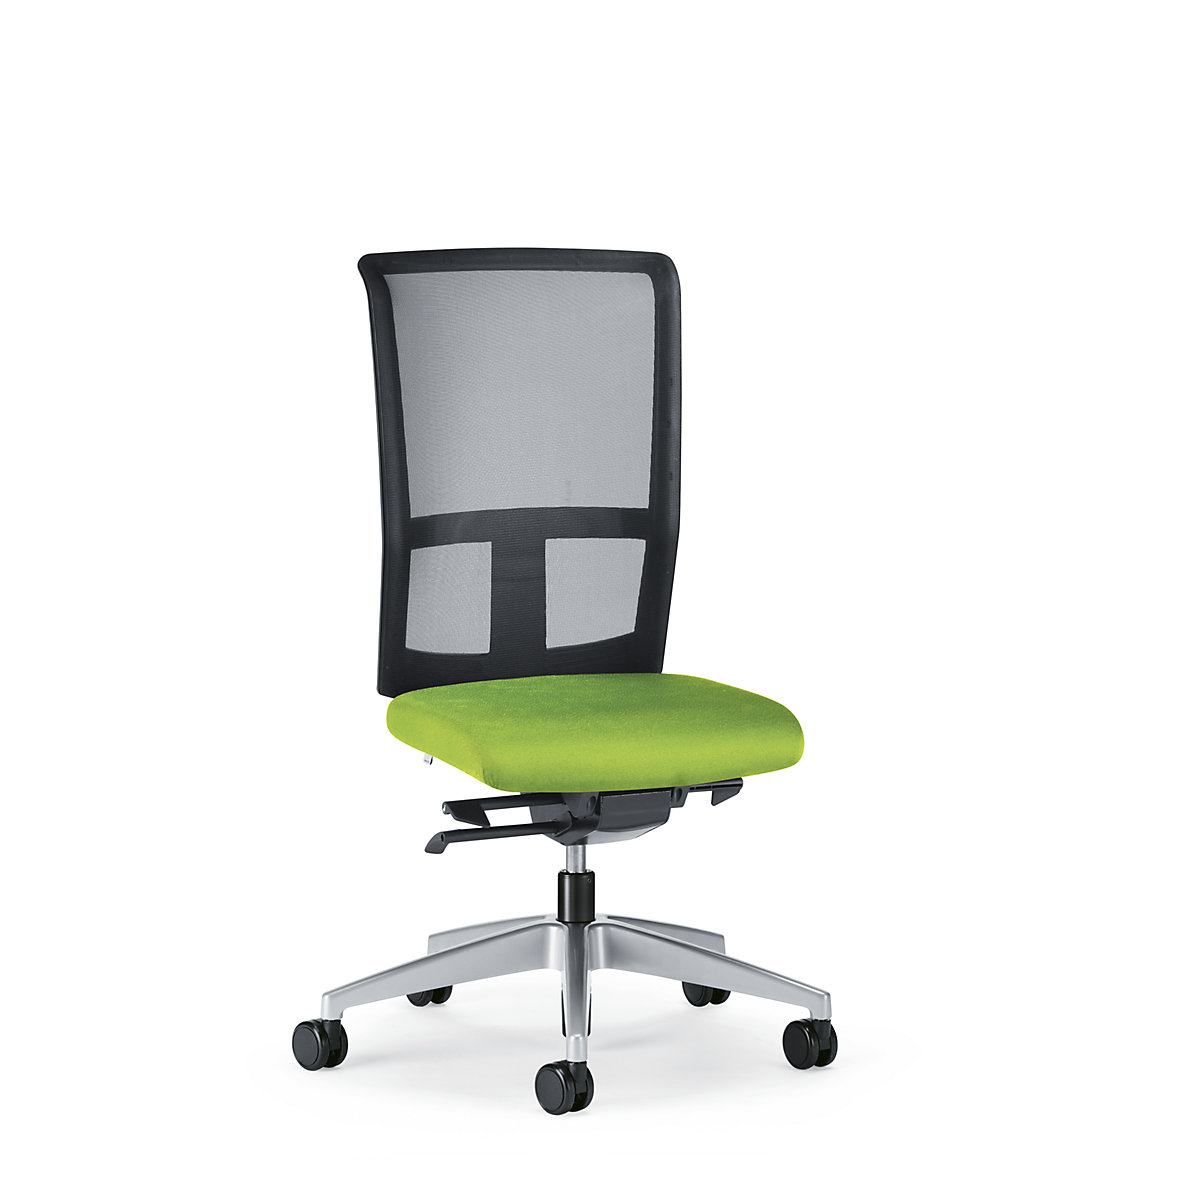 GOAL AIR office swivel chair, back rest height 545 mm – interstuhl, brilliant silver frame, with soft castors, yellow green, seat depth 410 mm-4